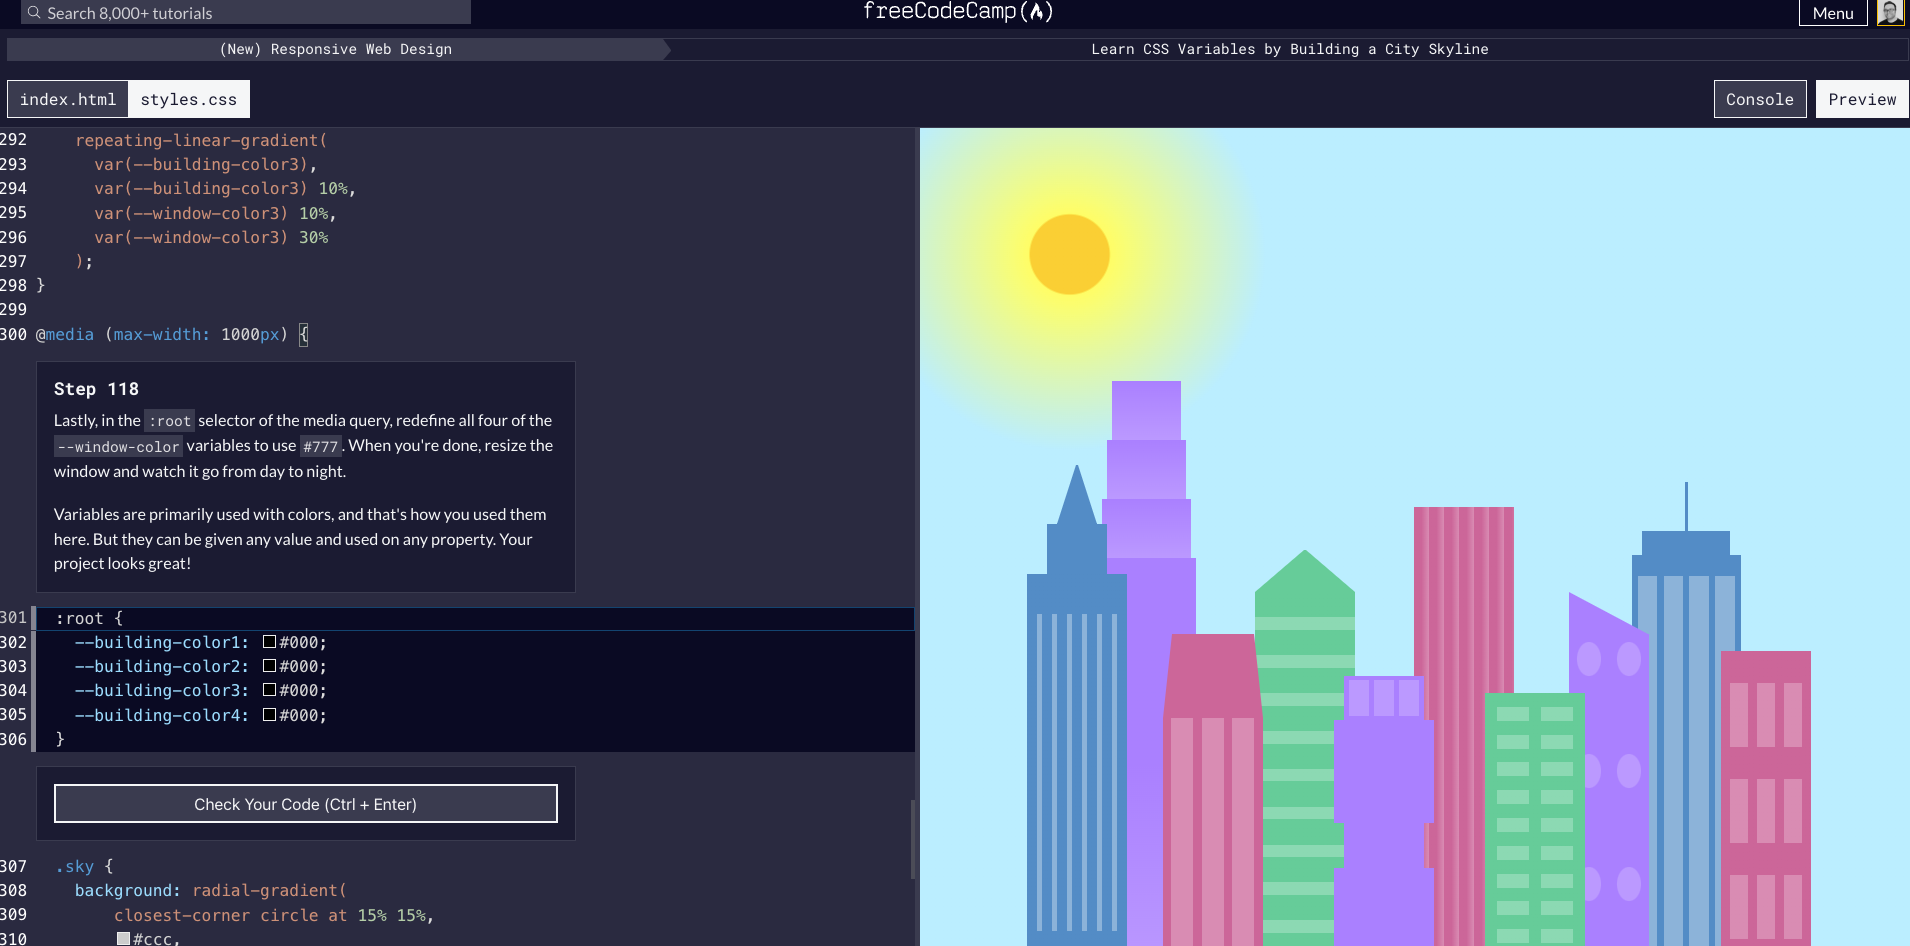 Learn_CSS_Variables_by_Building_a_City_Skyline__Step_118___freeCodeCamp_org_--